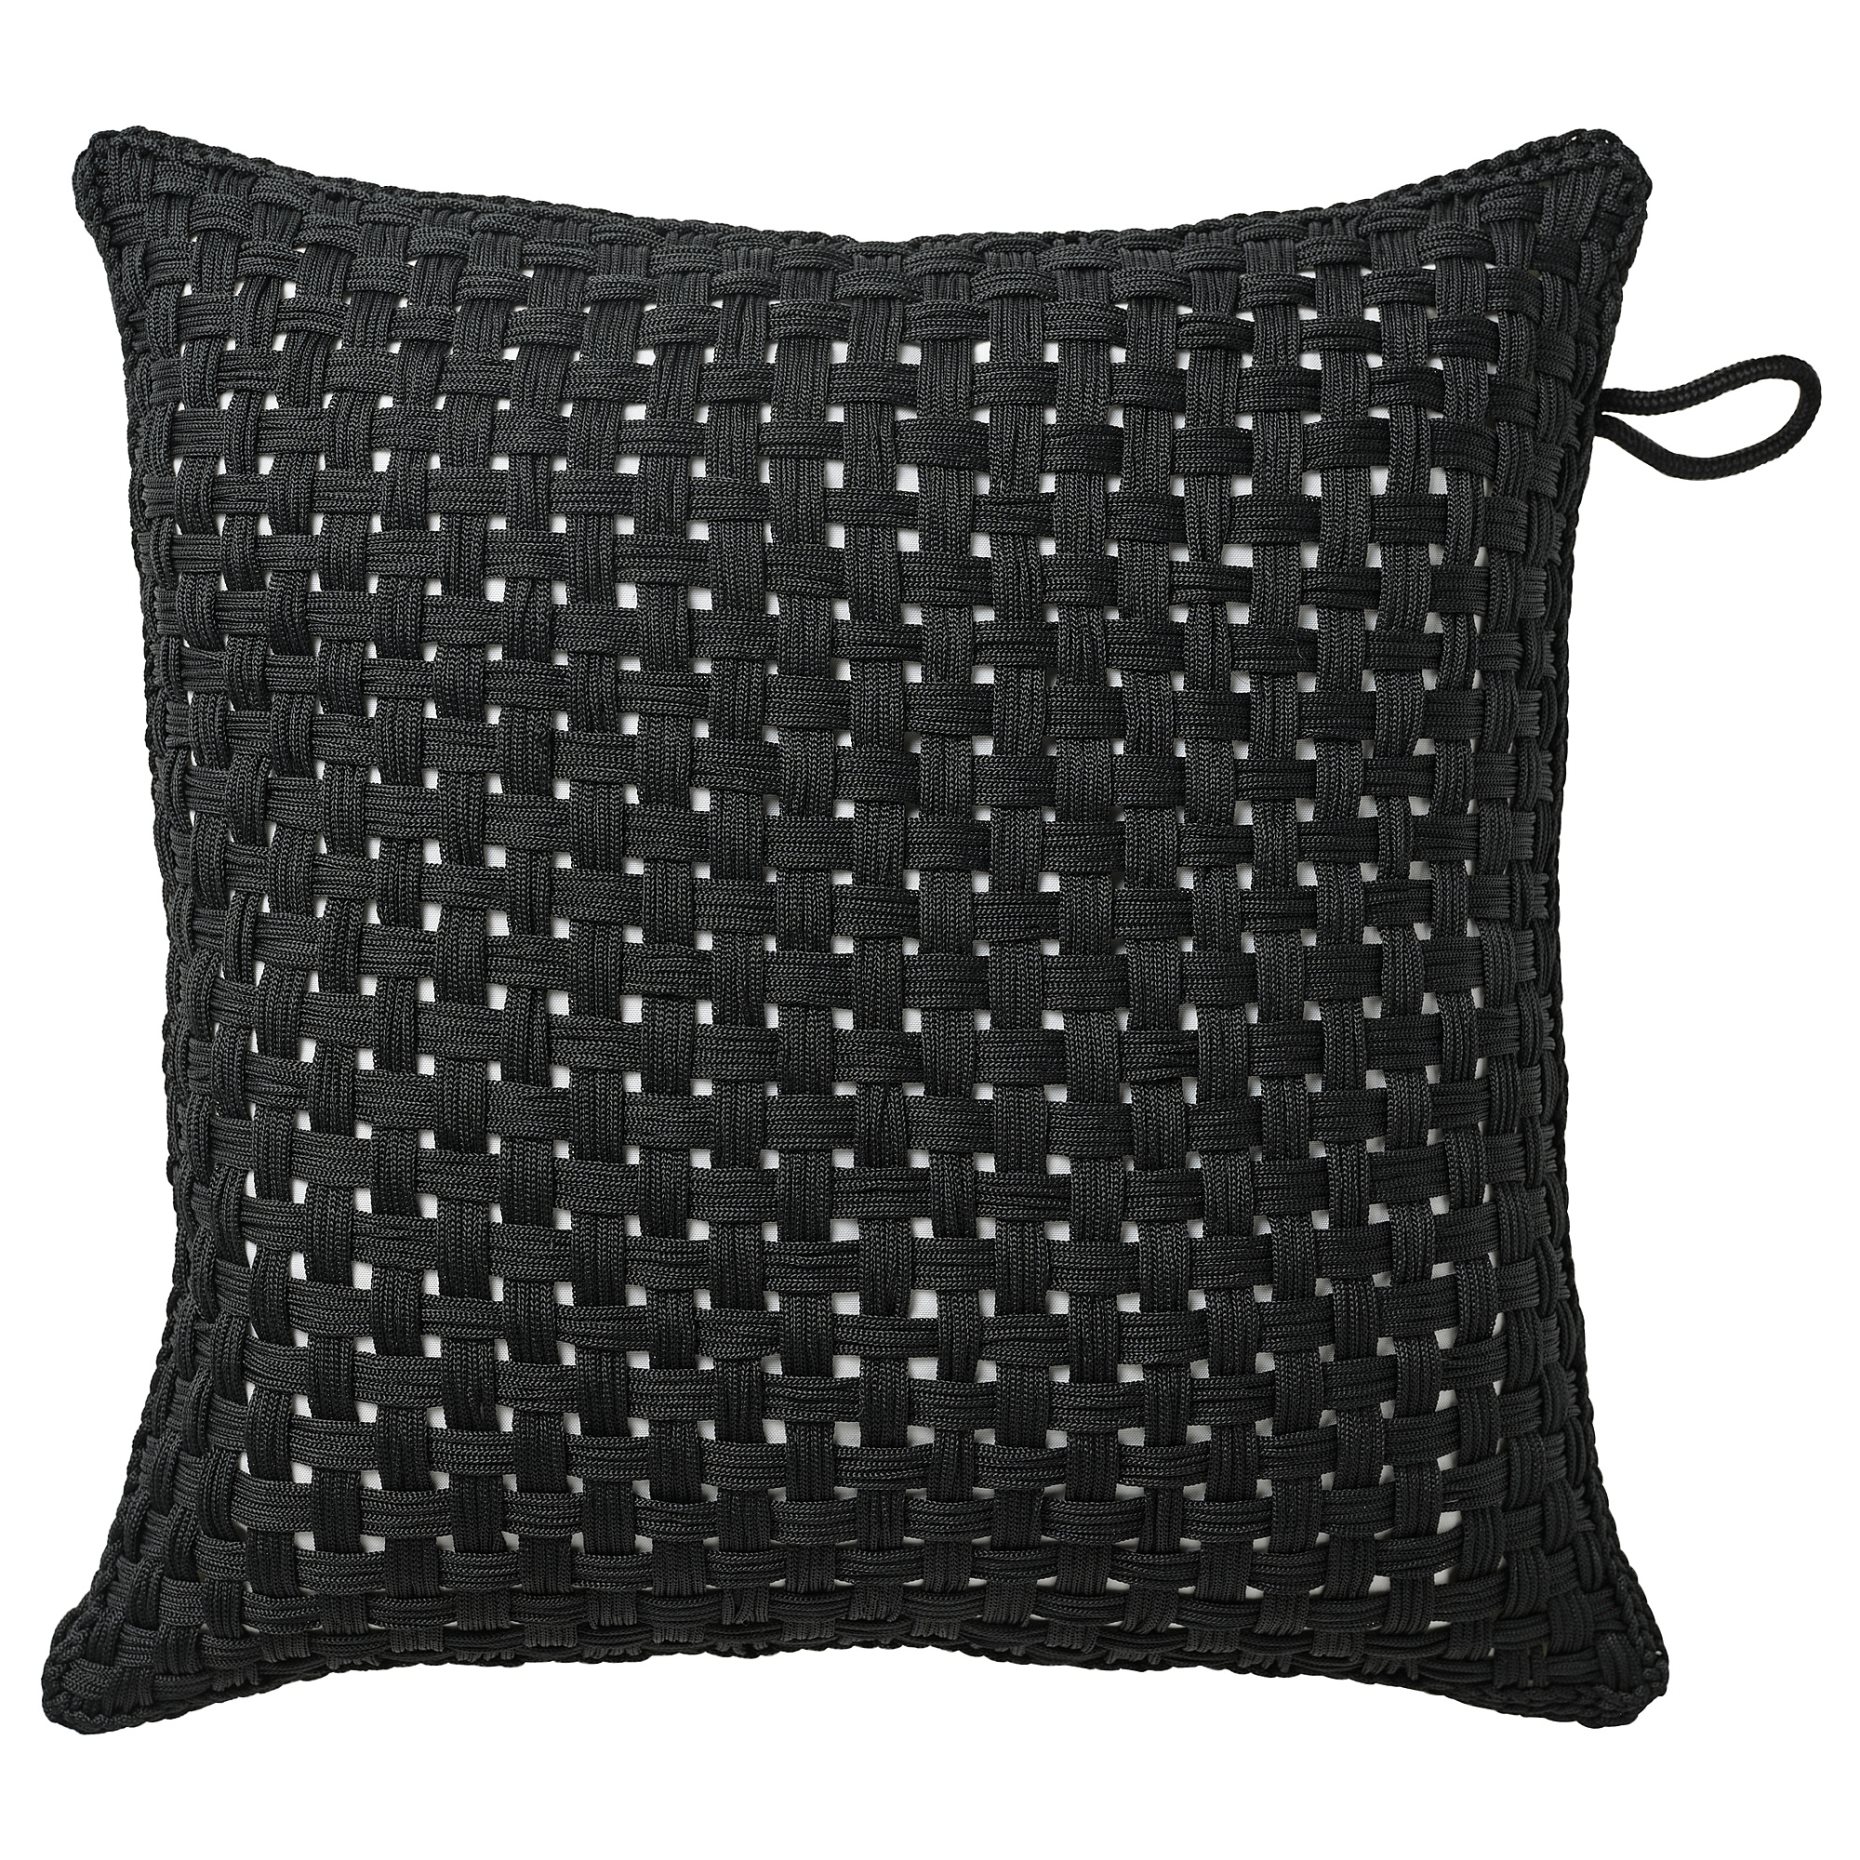 TOFTÖ, cushion cover/in/outdoor, 50x50 cm, 005.472.84